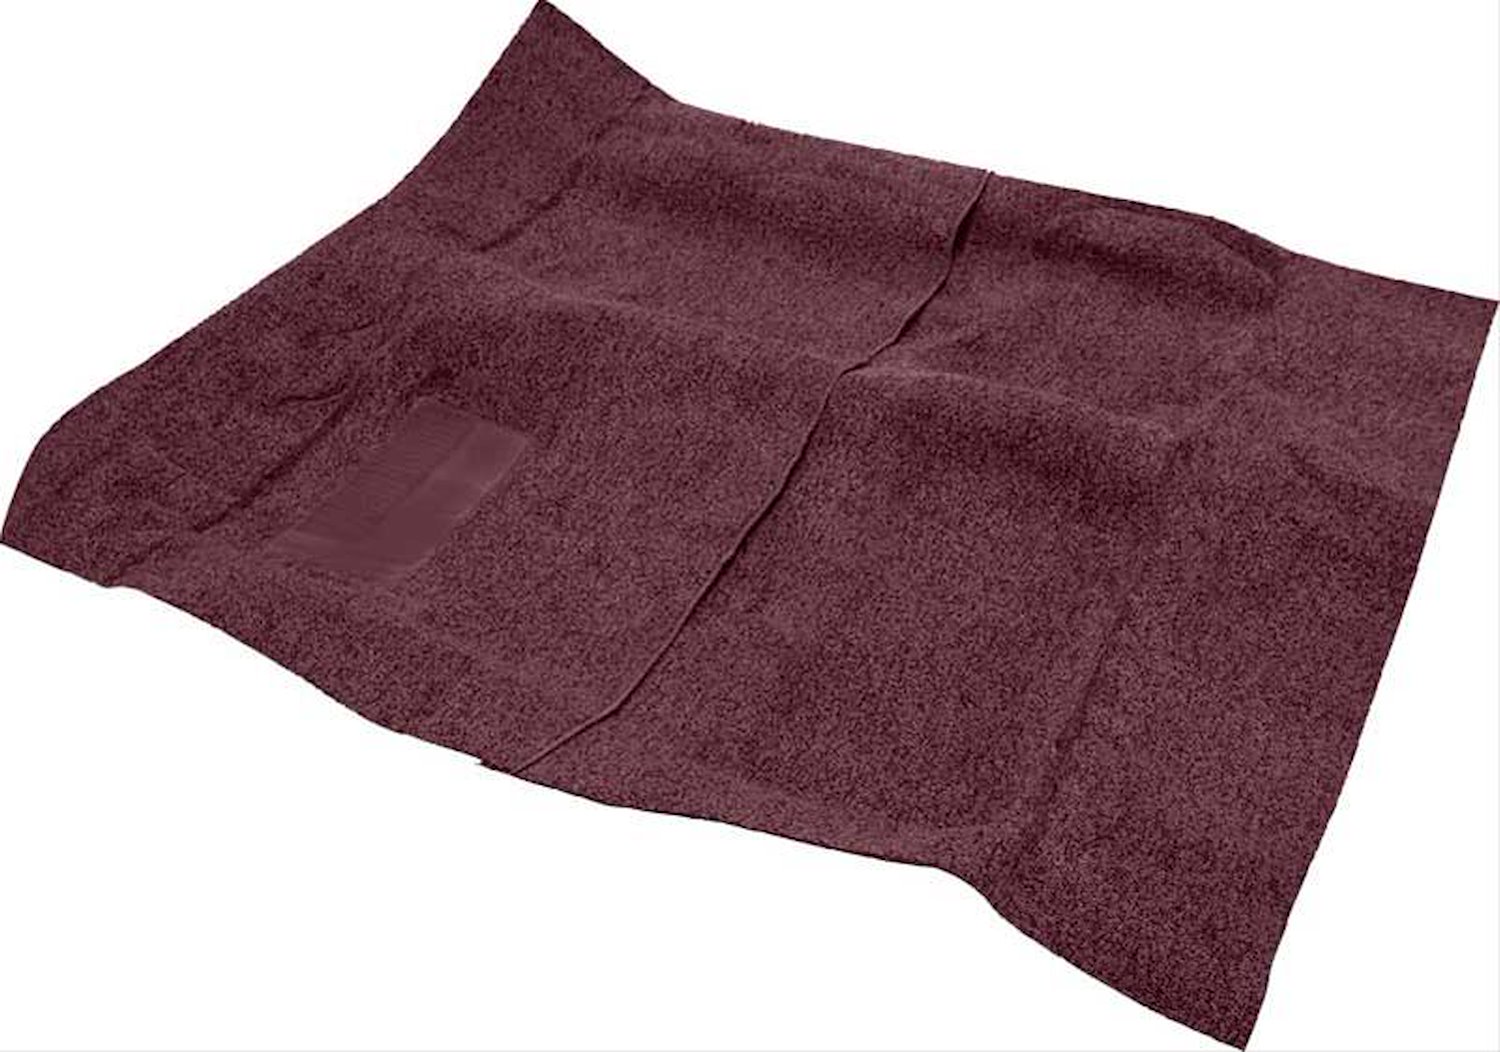 MA545825 Cut Pile Carpet 1974-76 Dodge Dart Sport/Plymouth Duster 2-Door With 4-Speed Maroon